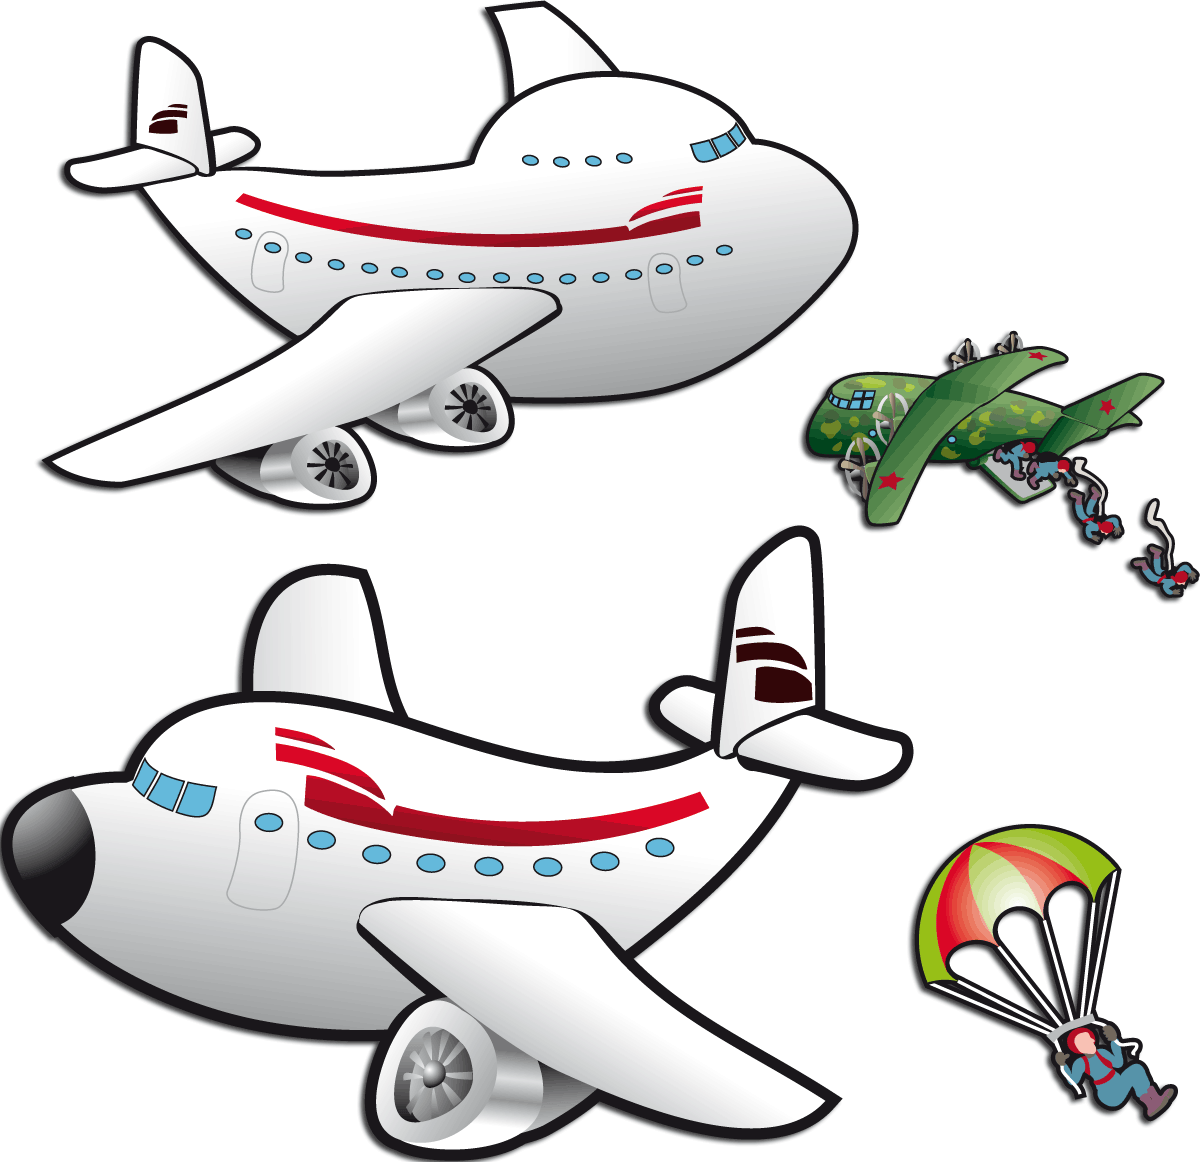 Stickers for Kids: Airplanes and parachutists